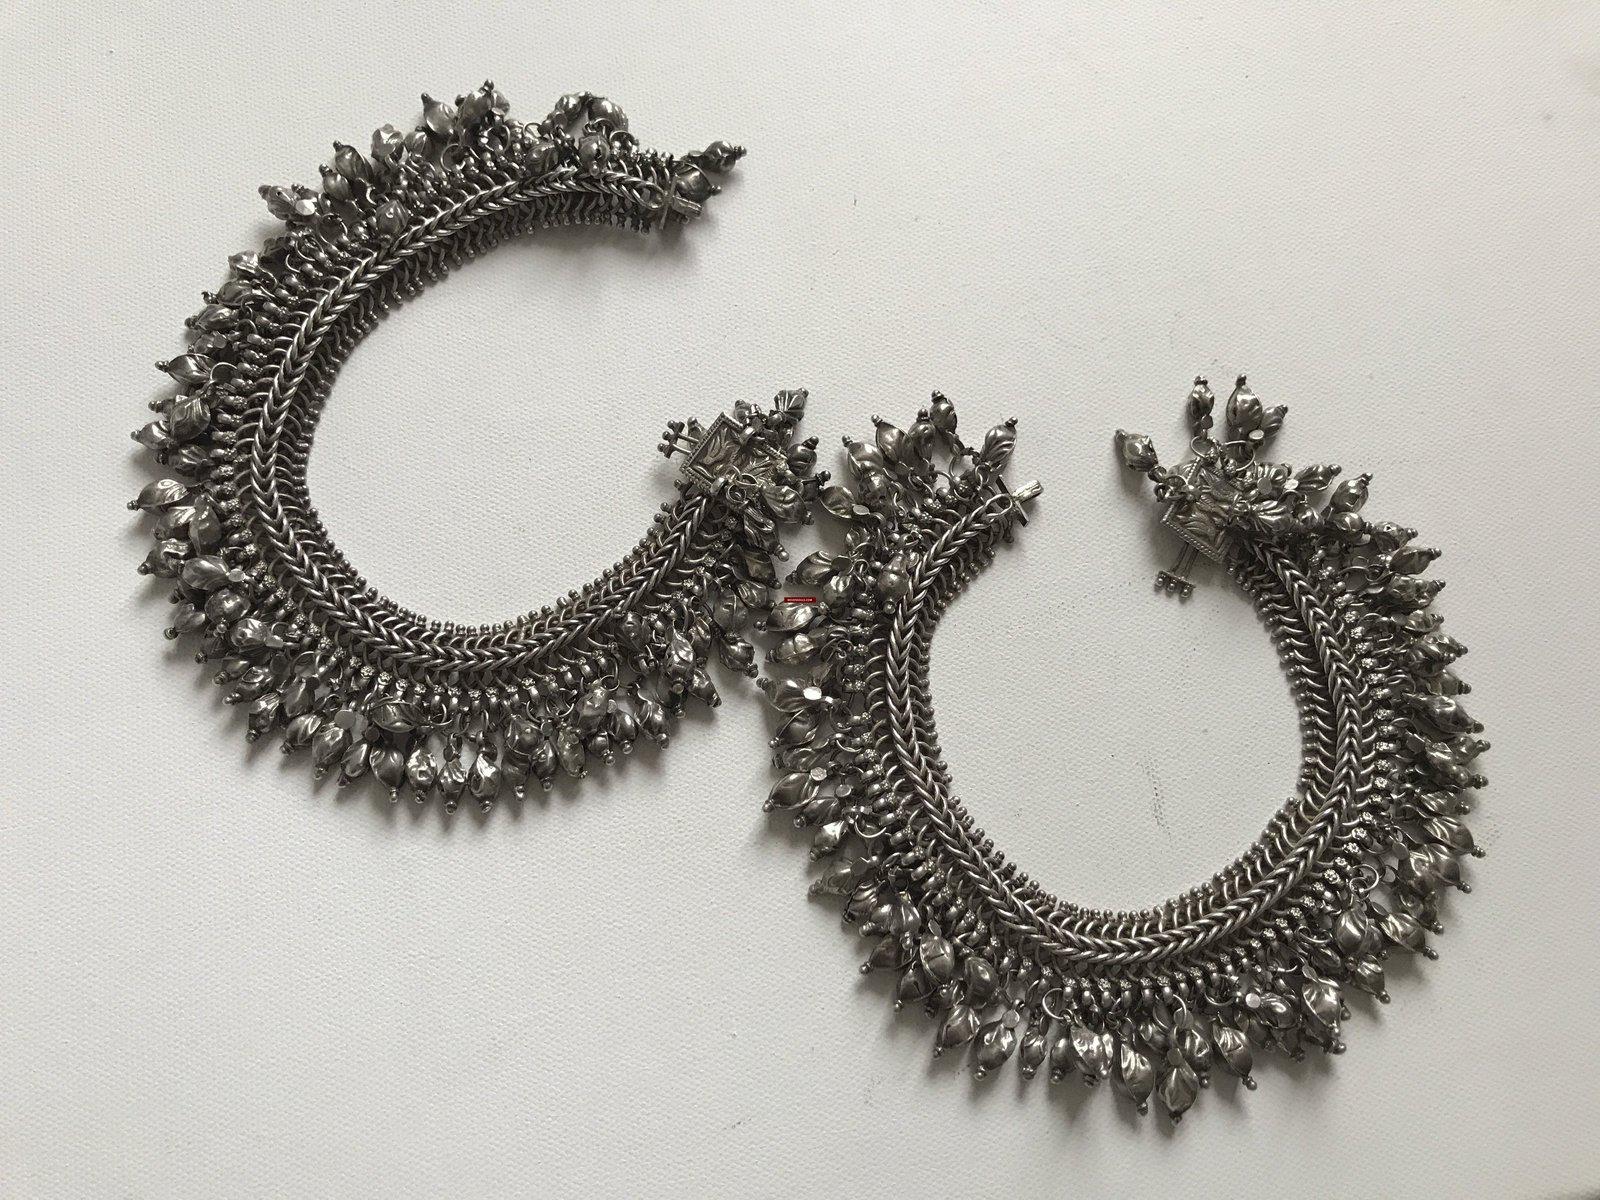 1201 Old Silver Anklets Payal with Uniquely shaped - WOVENSOULS Antique  Textiles & Art Gallery